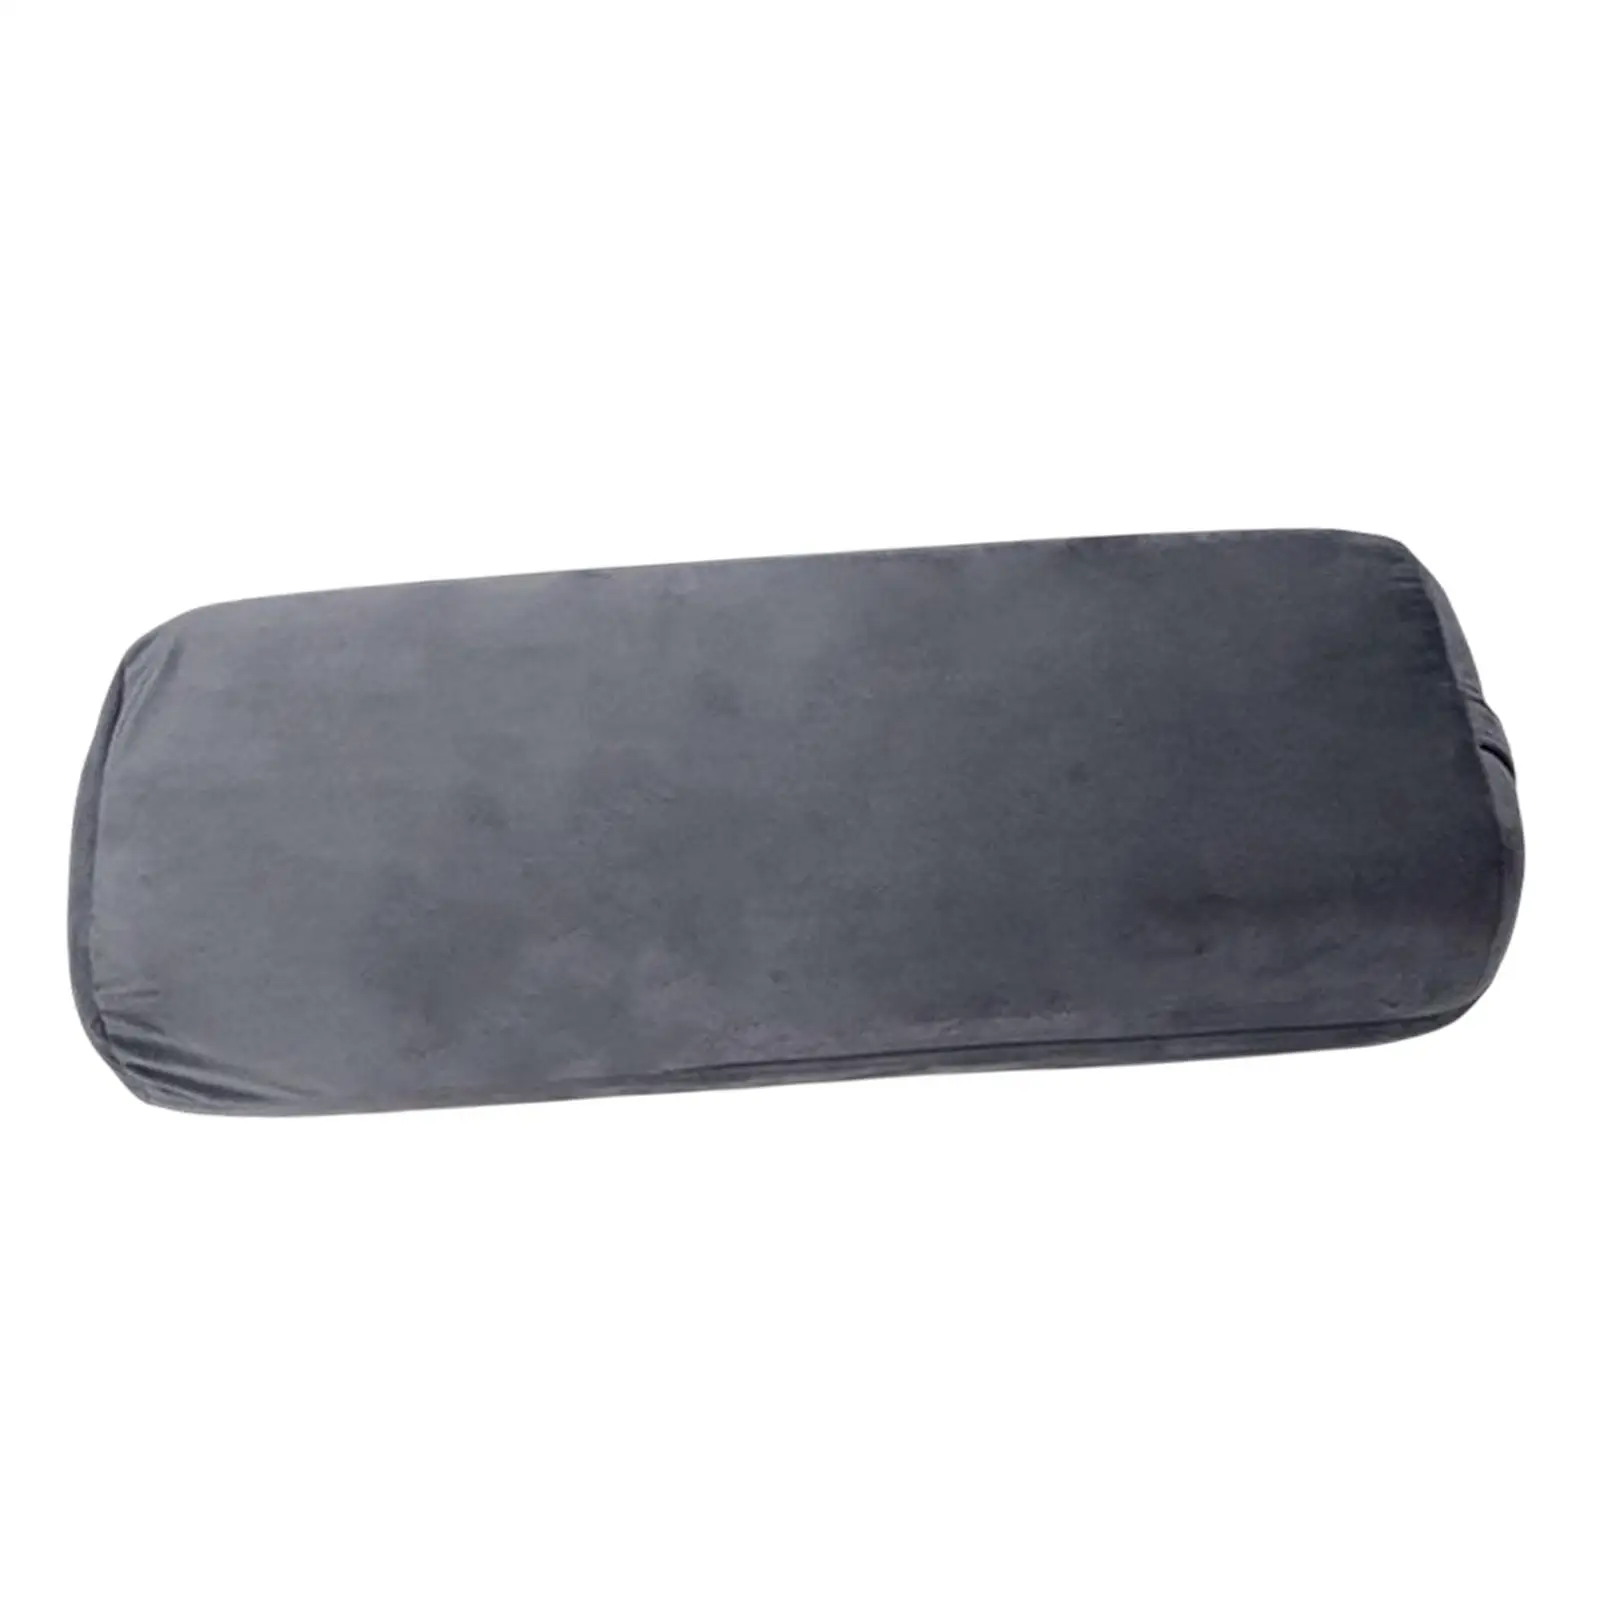 Yoga Bolster Pillow Rectangular Removable Cover Comfortable with Carry Handle Yoga Accessories for Legs Restorative Yoga